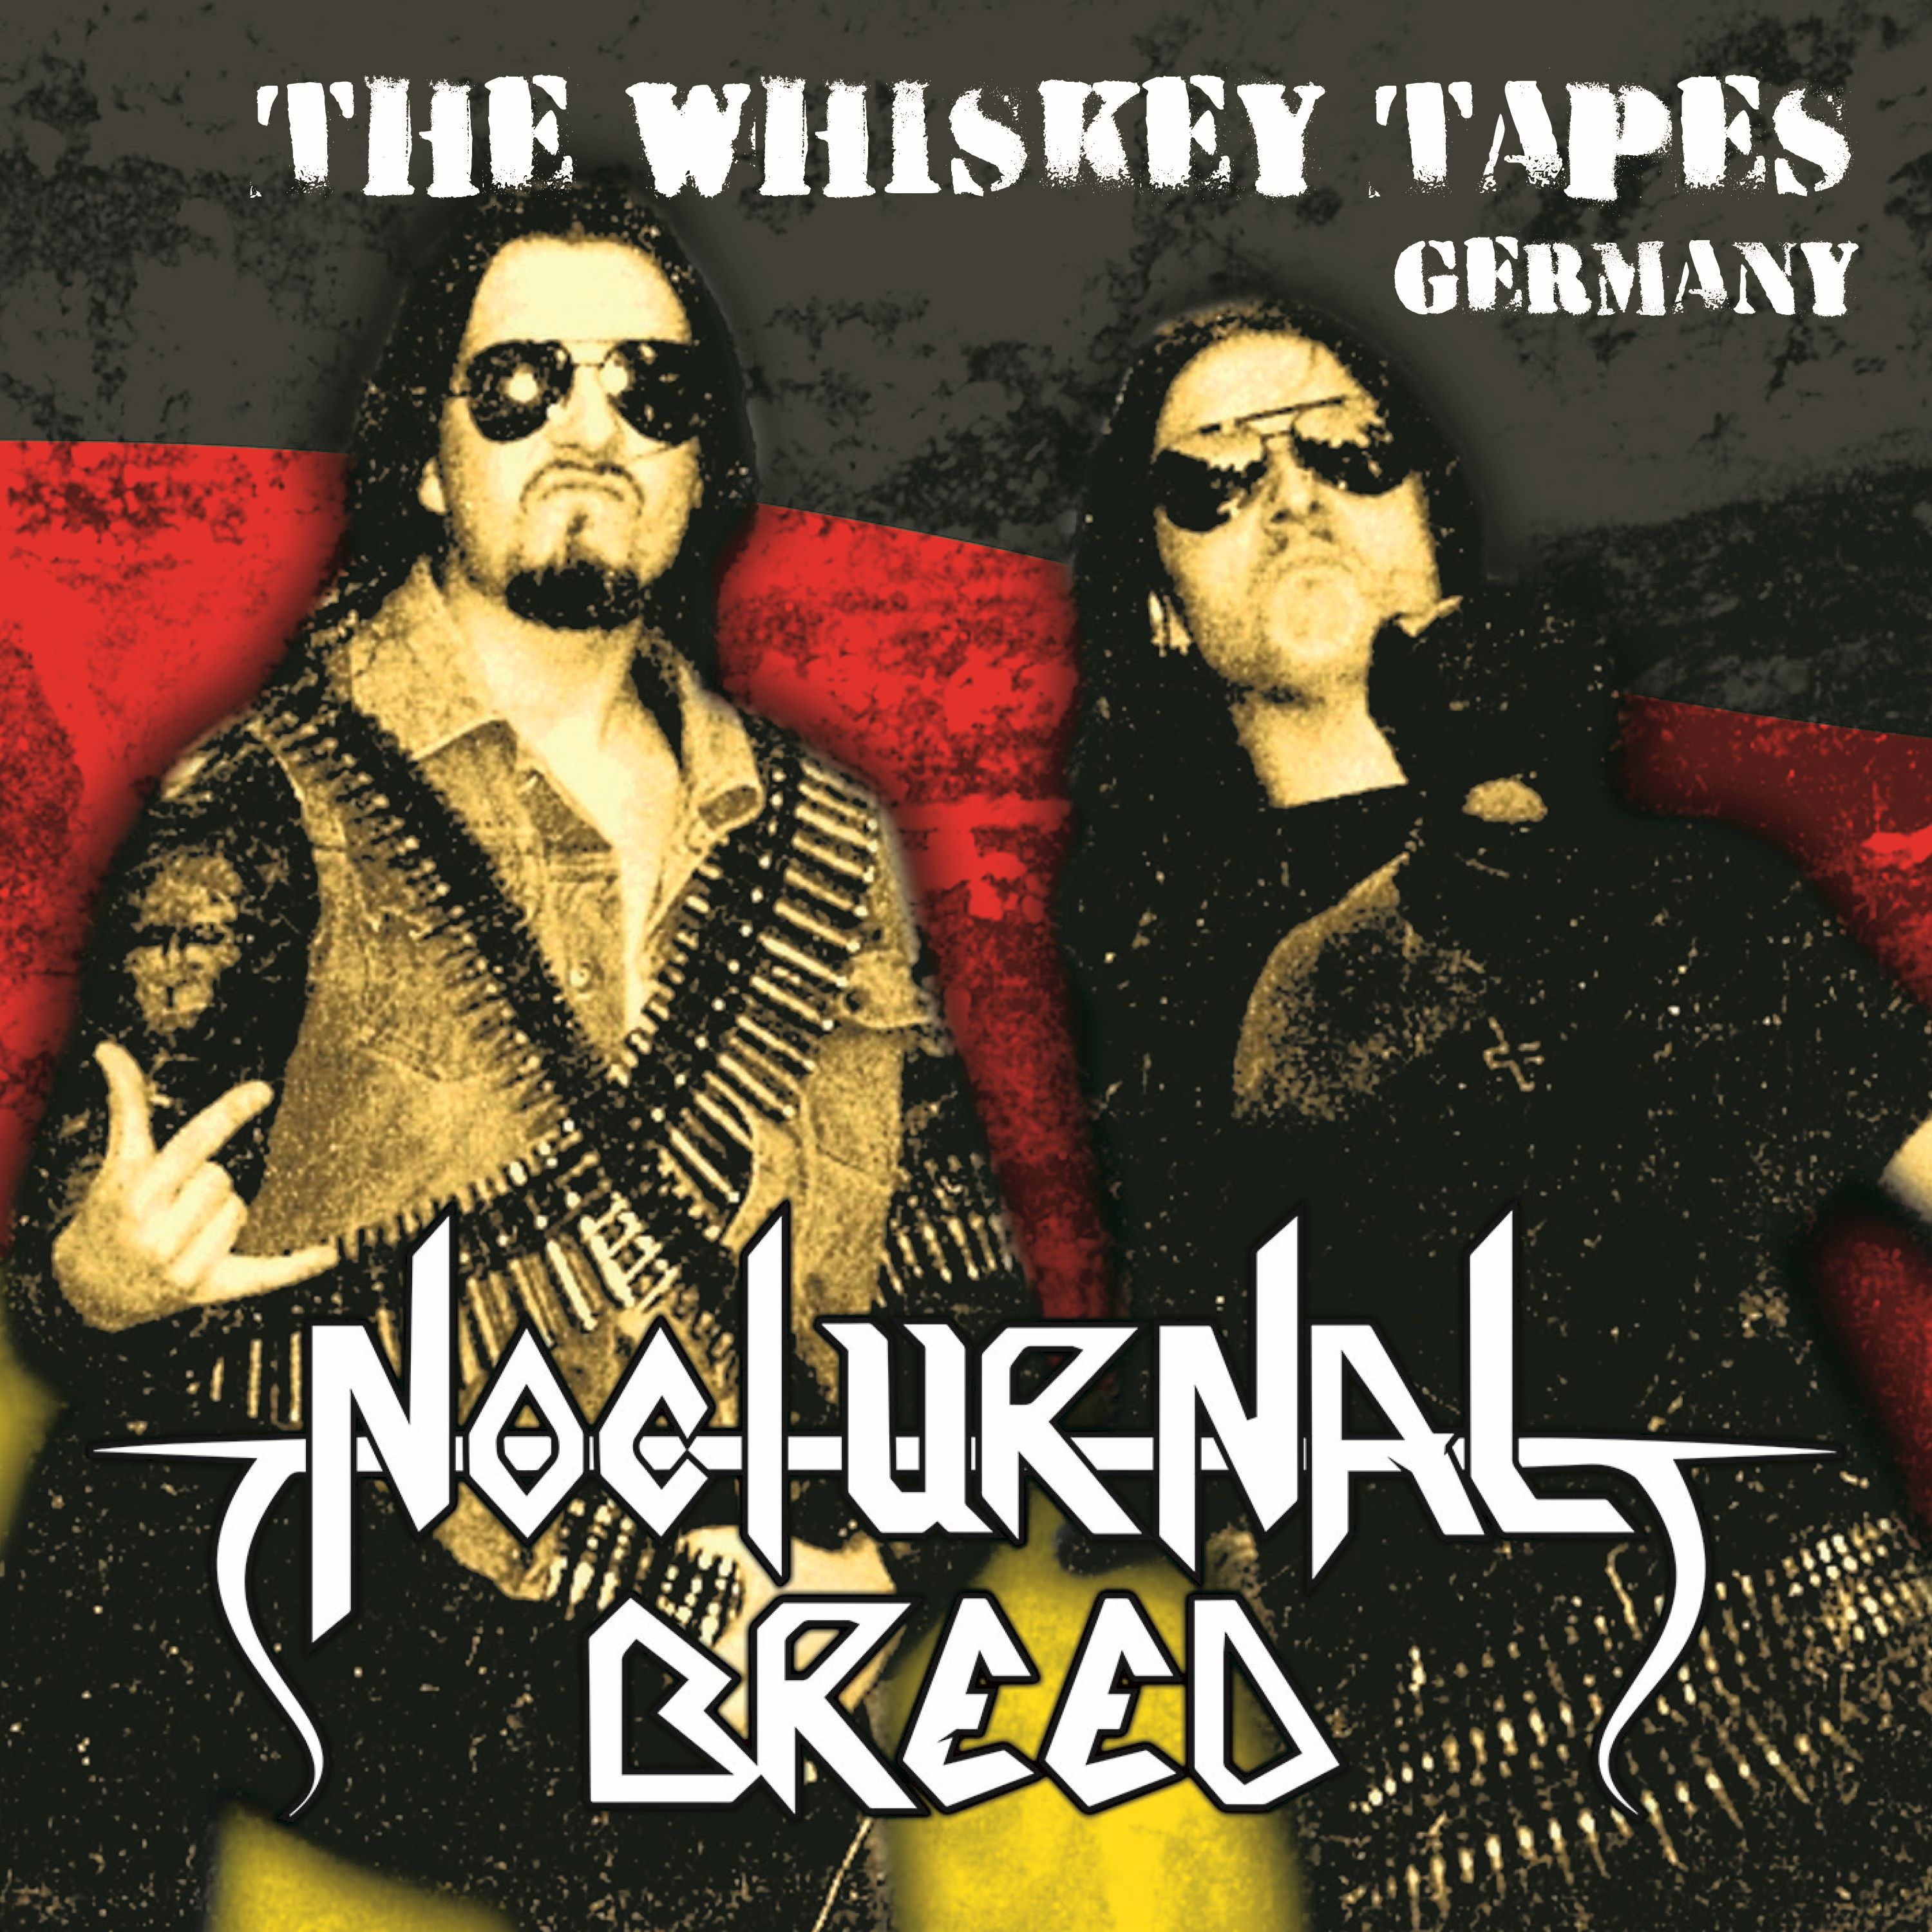 Nocturnal Breed - The Whiskey Tapes Germany